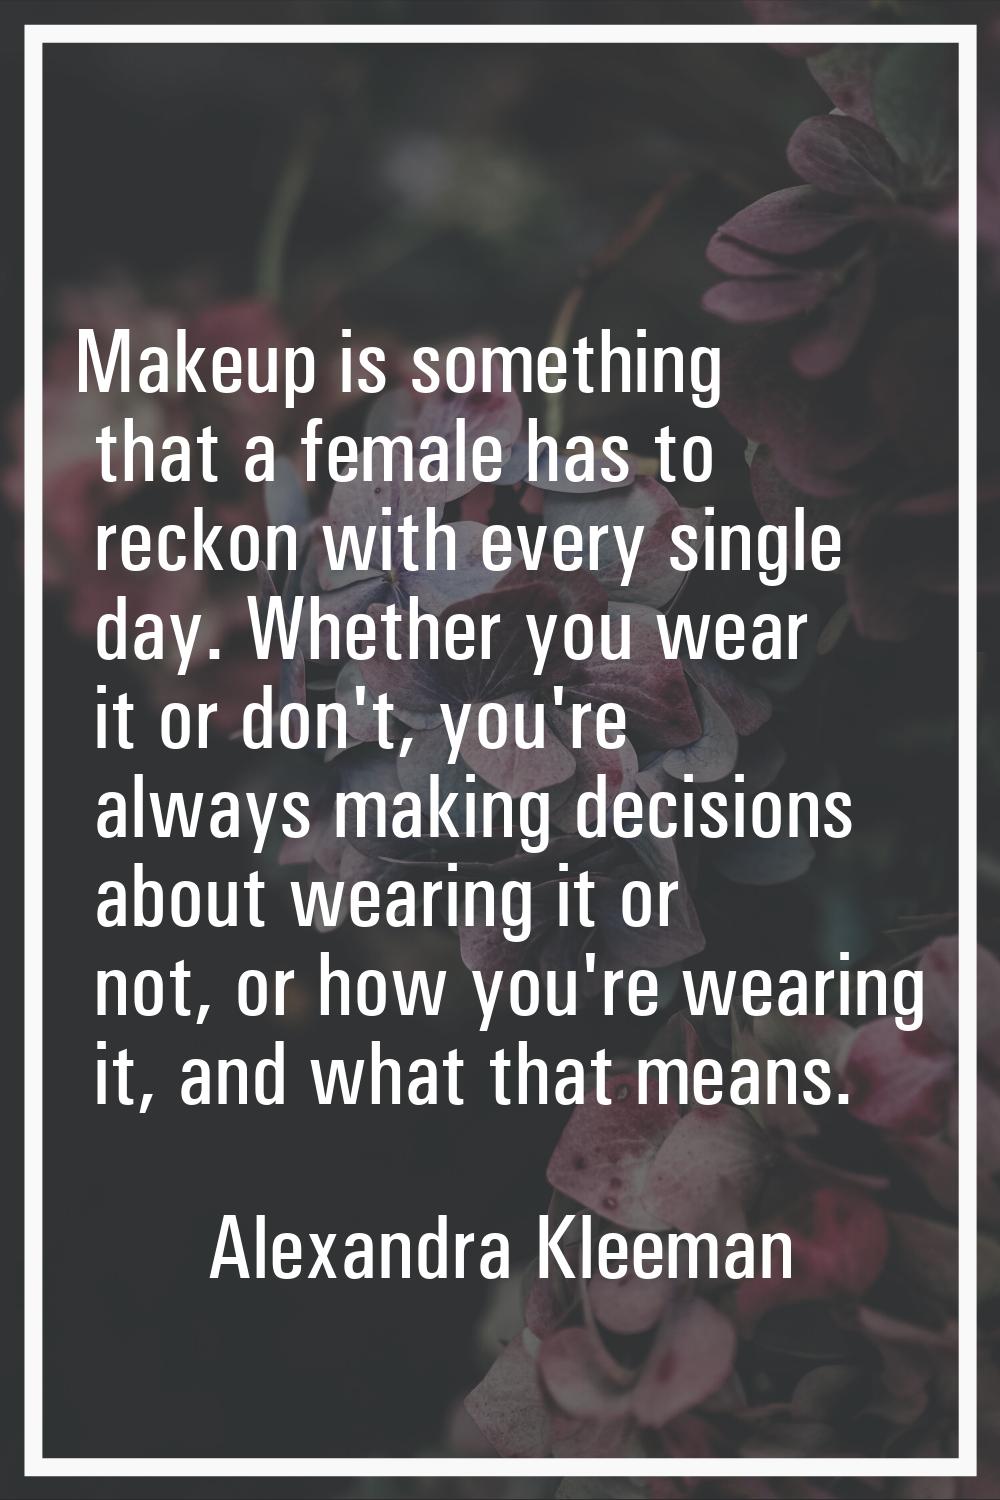 Makeup is something that a female has to reckon with every single day. Whether you wear it or don't